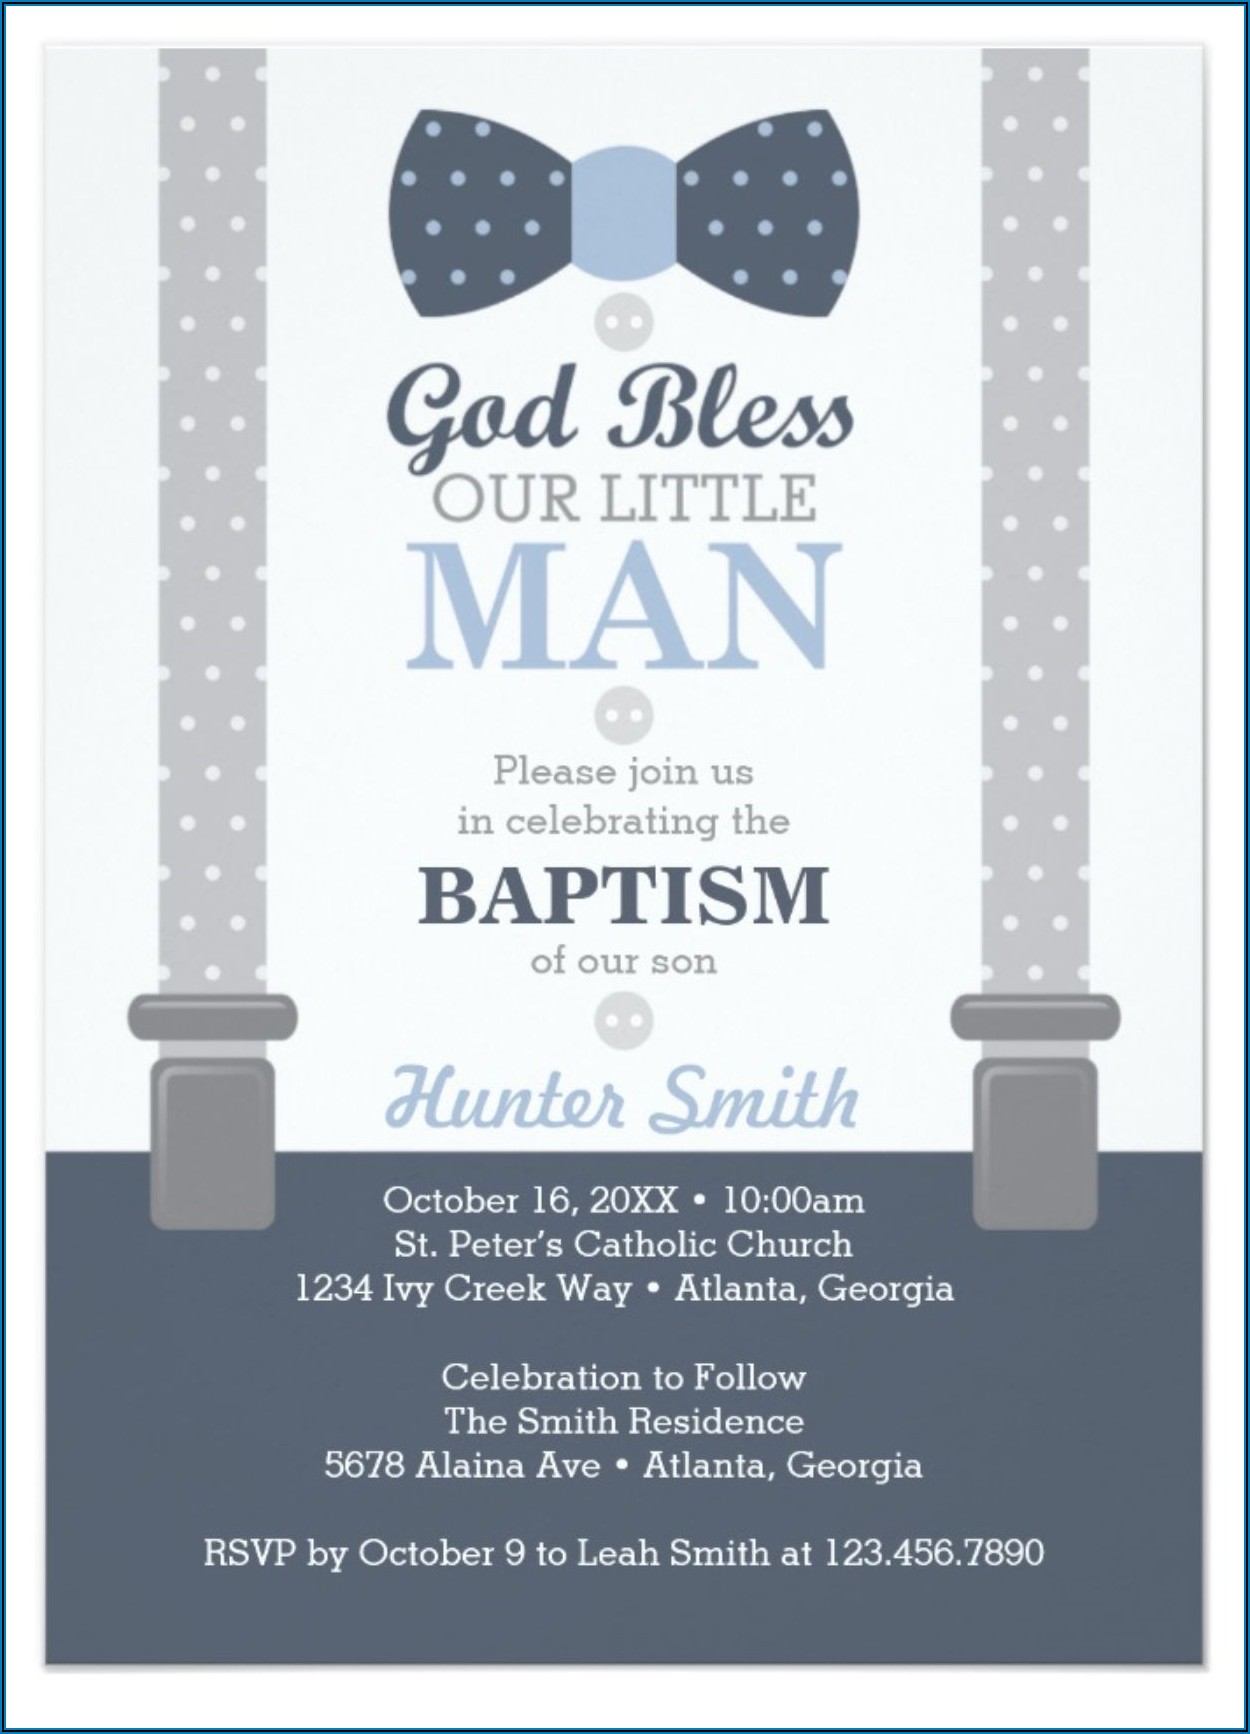 Baptismal Invitation For Baby Boy With Godparents